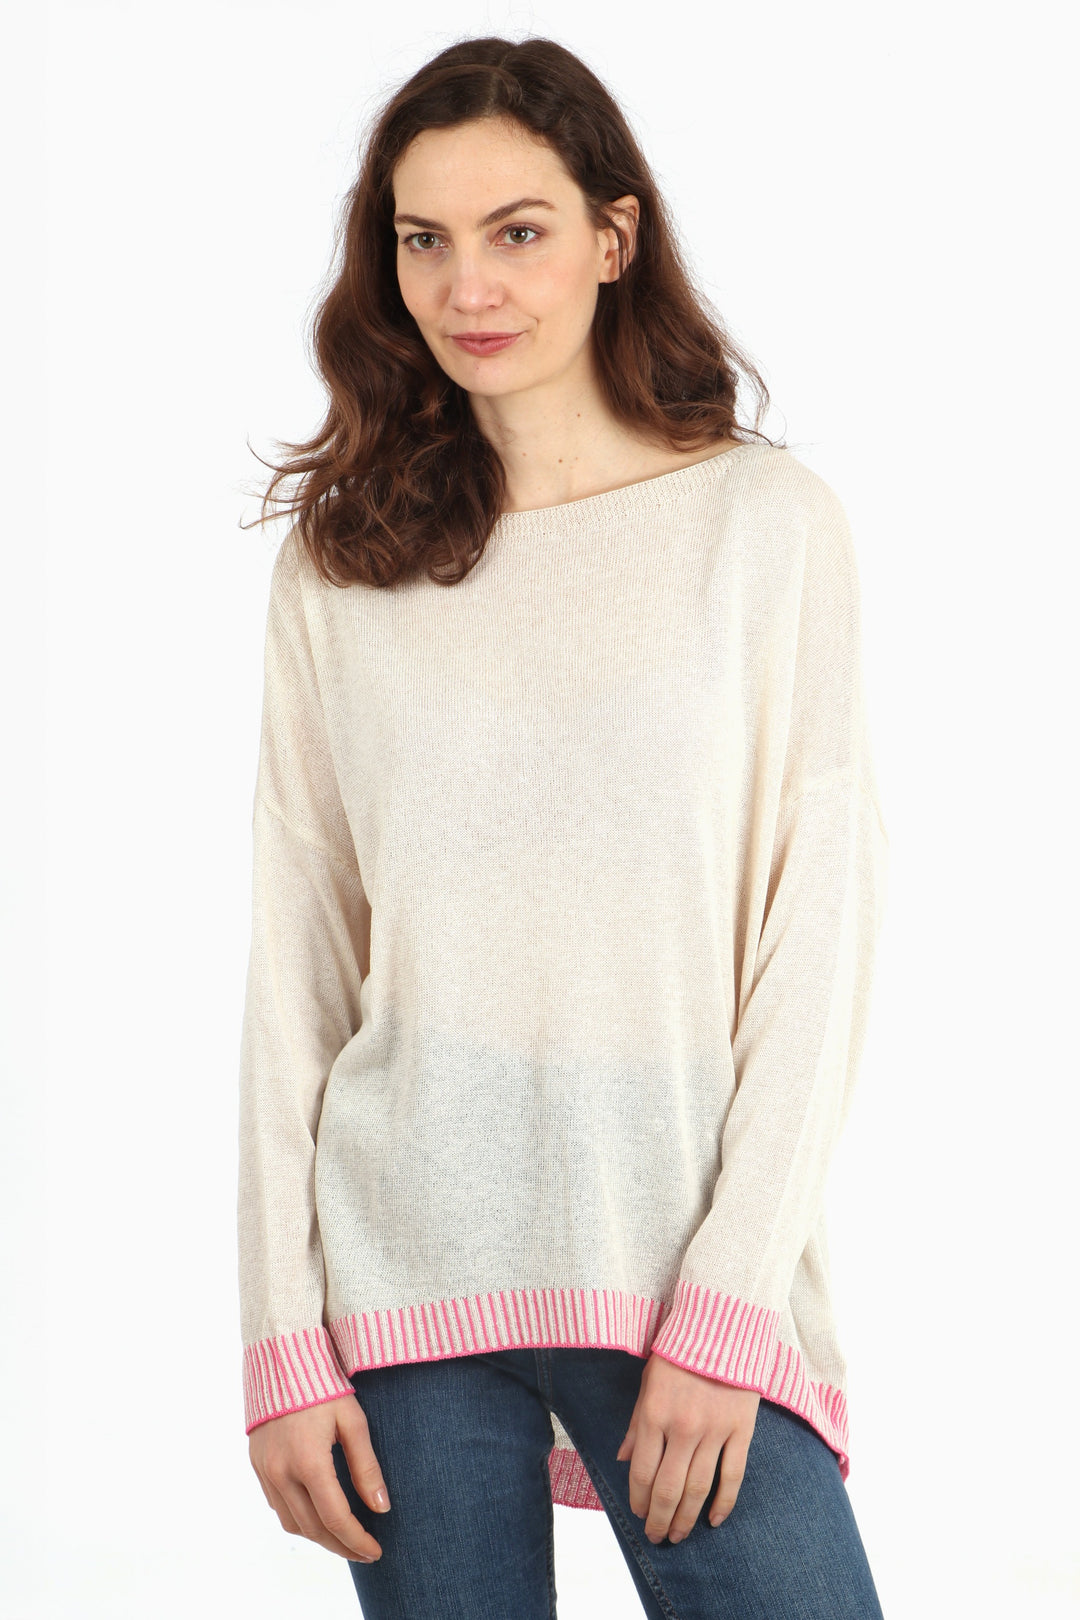 model wearing a long sleeve boat neck cotton jumper in cream with a contrasting fuchsia pink stitched hem and cuff